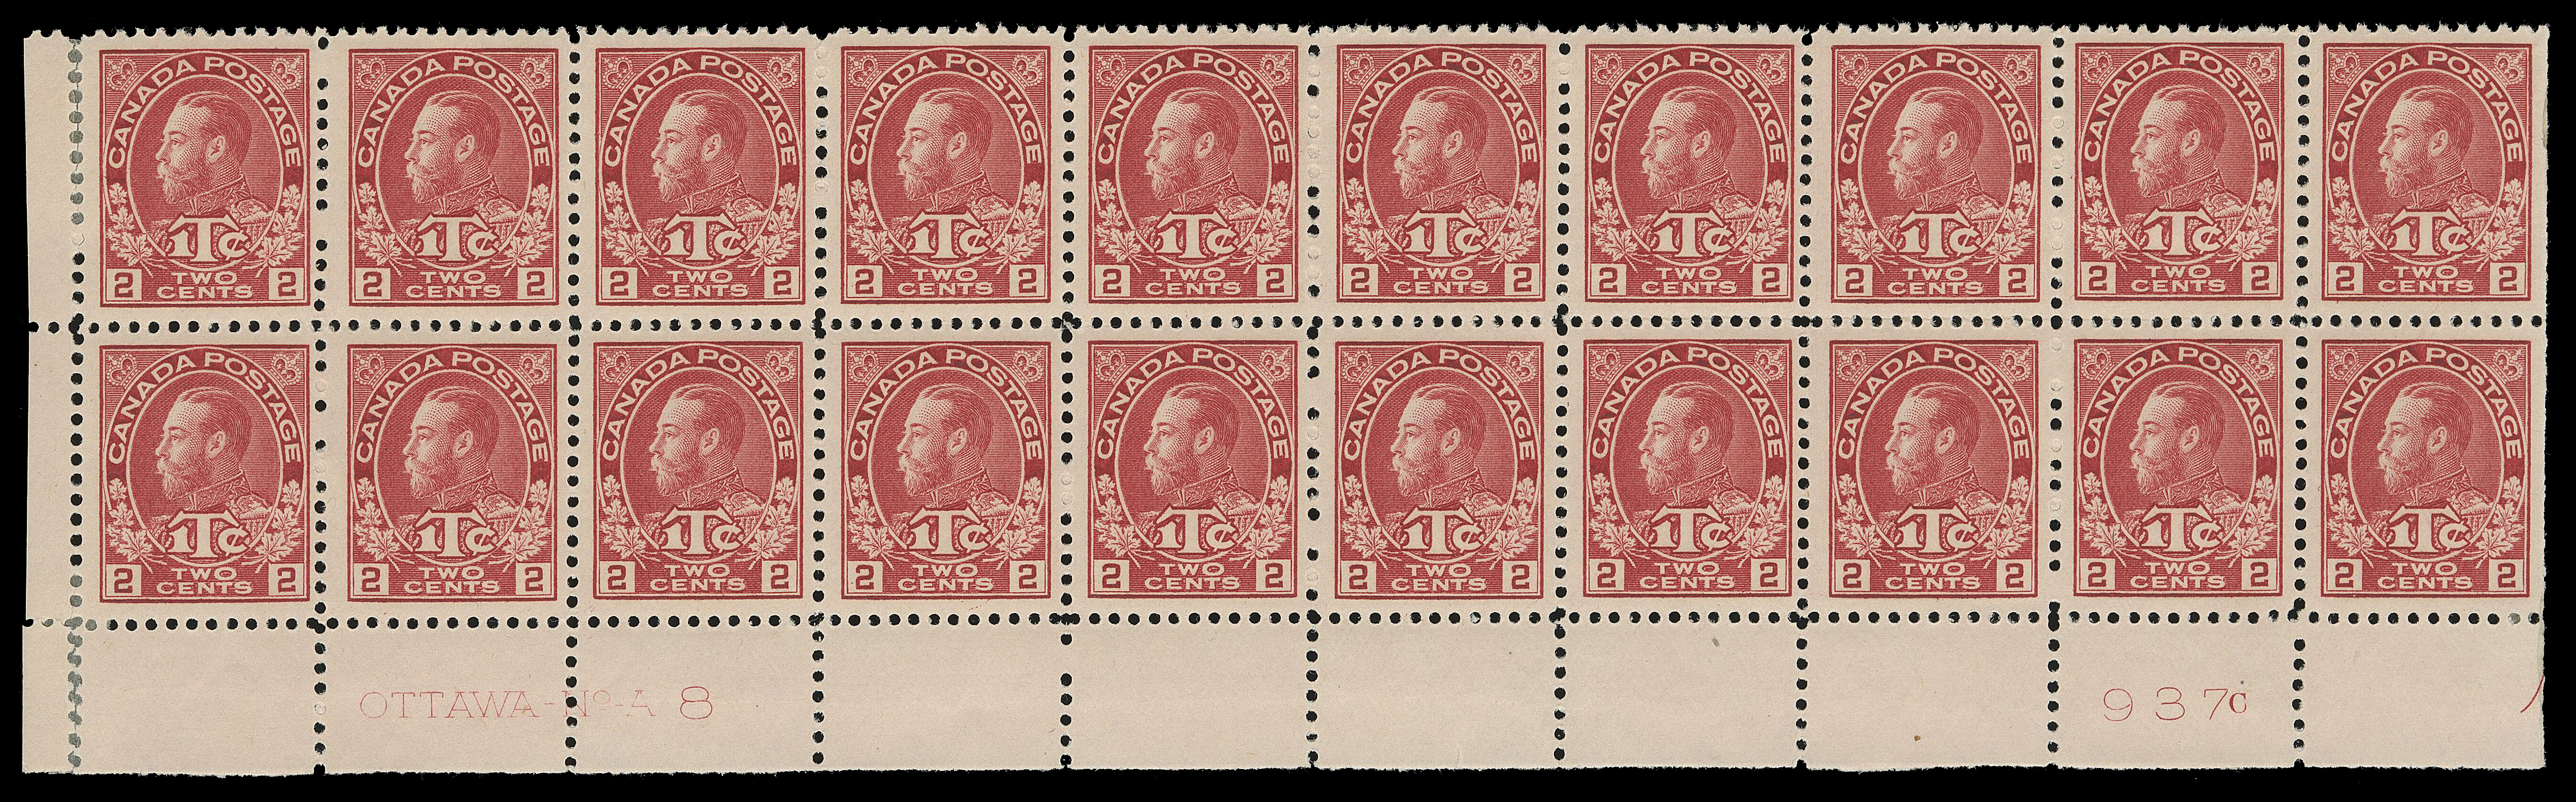 ADMIRAL STAMPS  MR3,Lower left Plate 8 block of twenty with printing order number "937C" at right, printed in an appealing bright shade and well centered; lower left corner selvedge severed and hinge supported, hinged on end columns leaving sixteen NH, VF and very scarce. (Unitrade cat. $3,120)